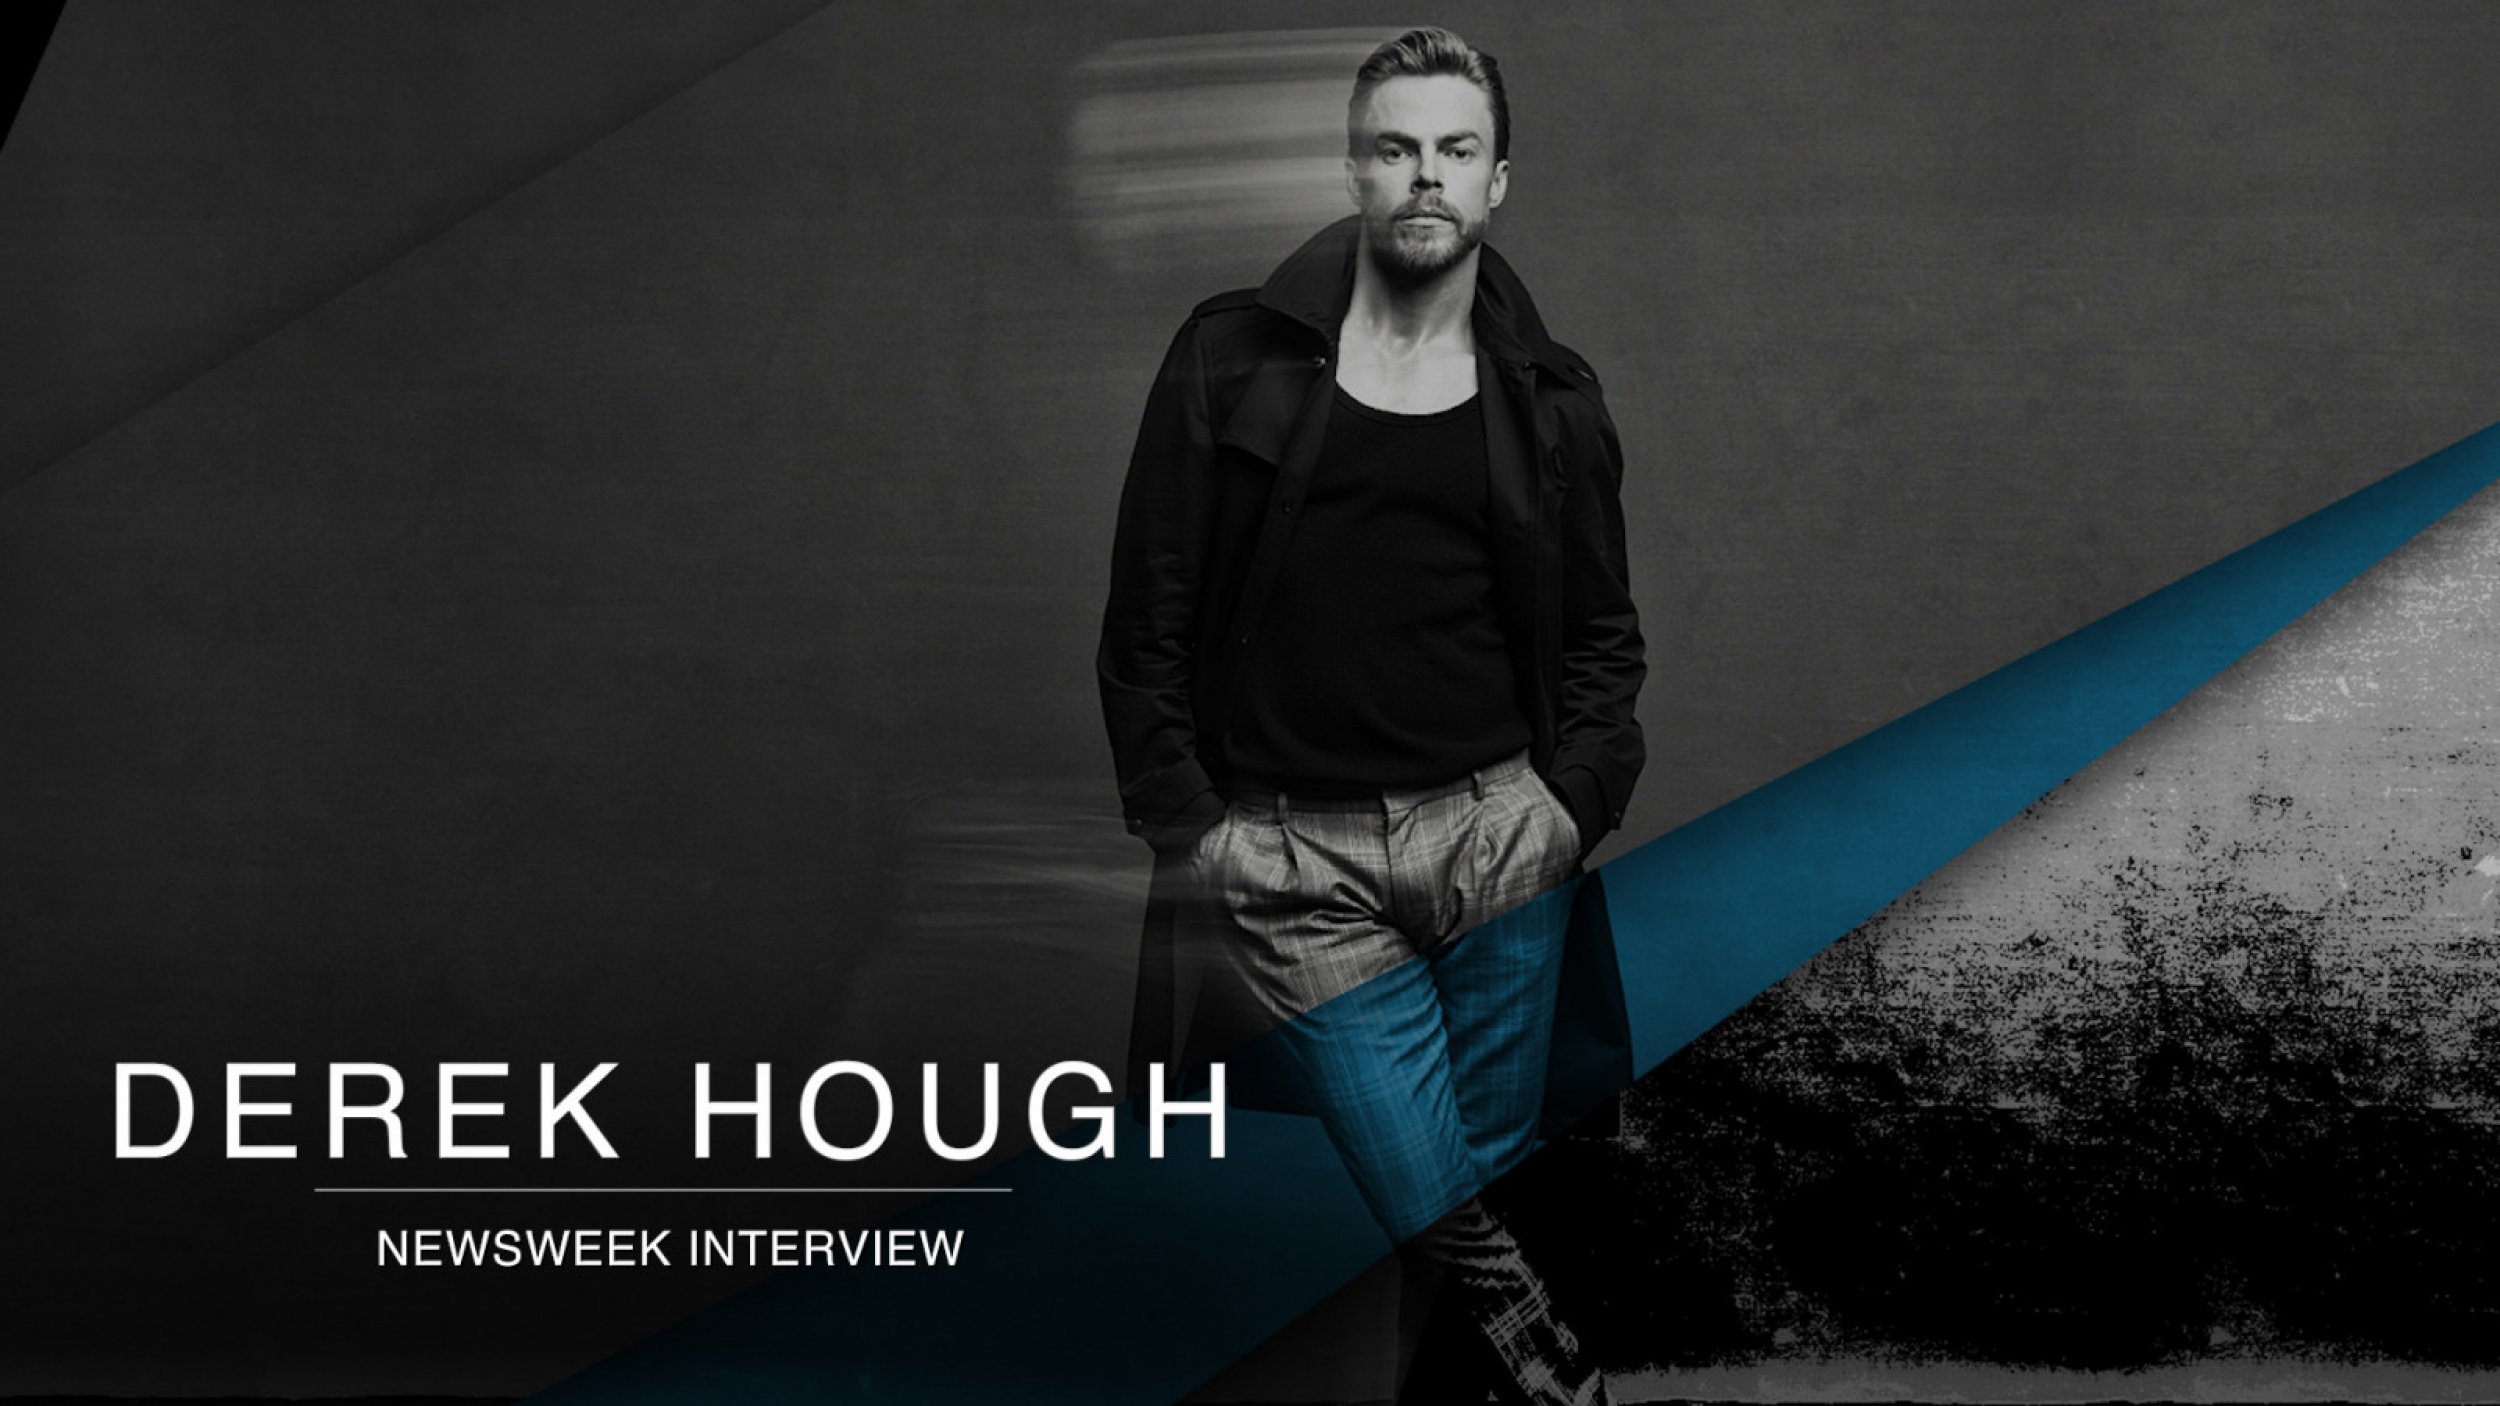 Derek Hough Breaks Down World of Dance And Unveils Love For Art As His Therapy